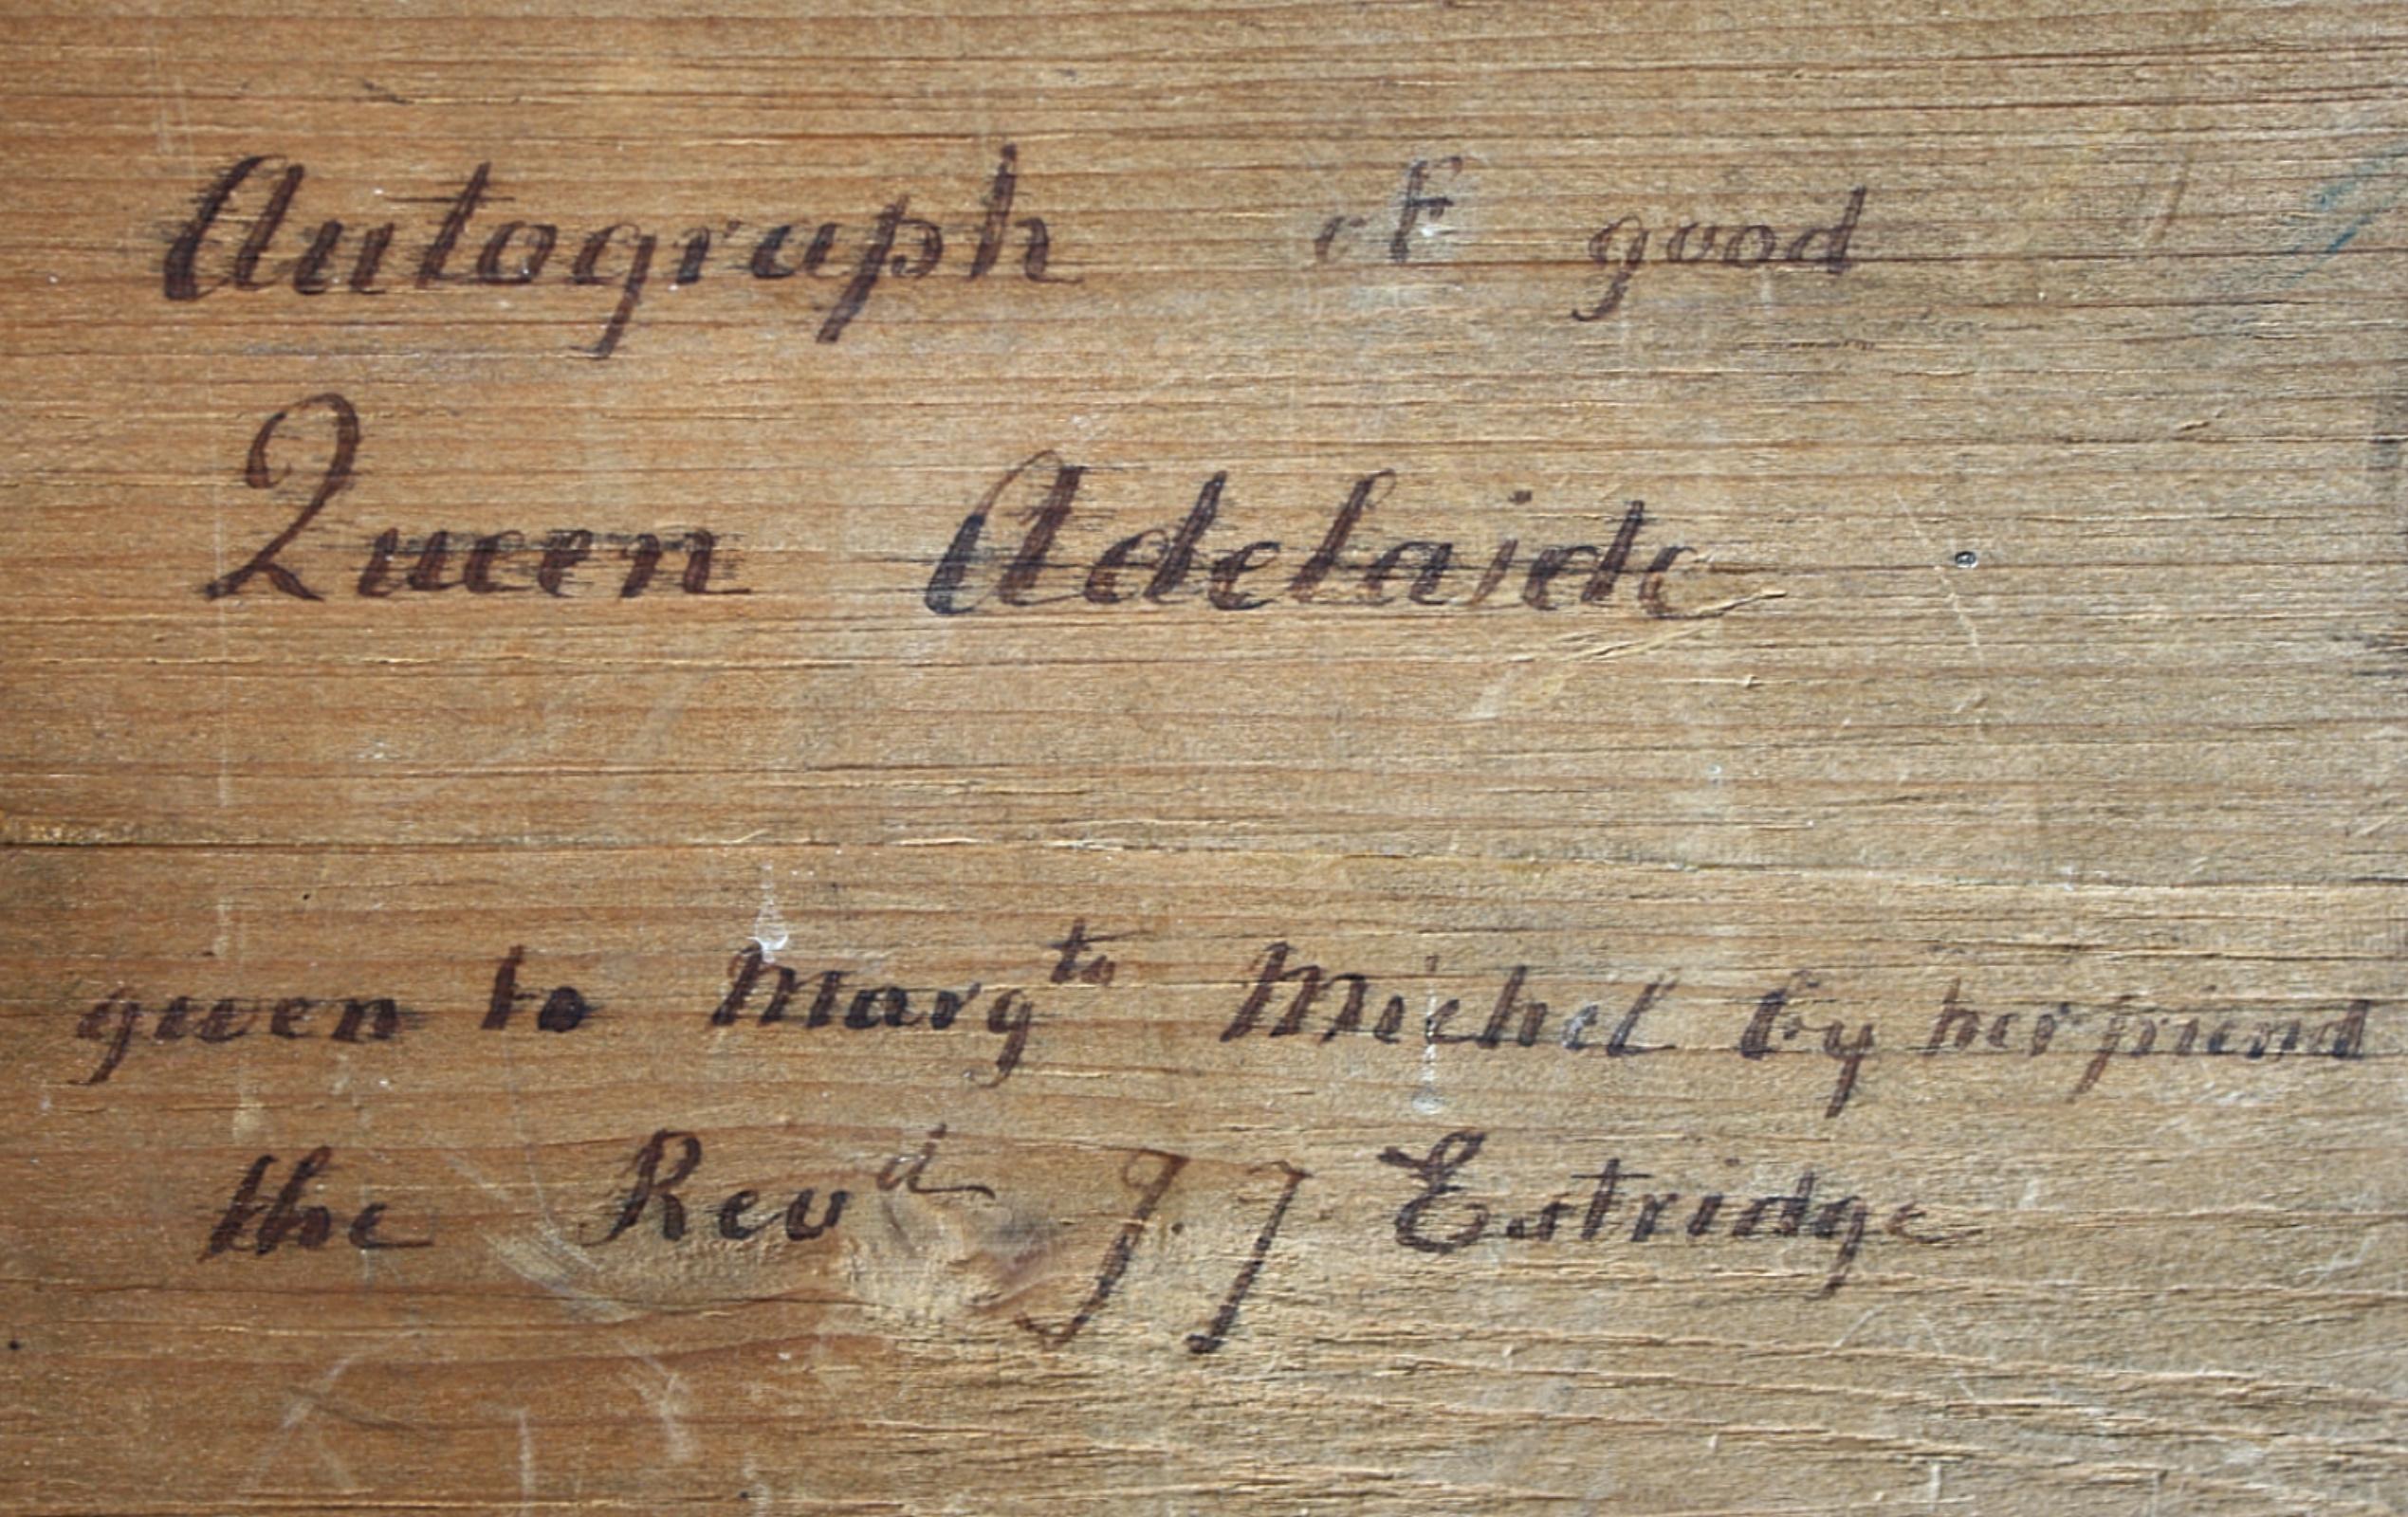 Gesso Queen Adelaide, Dowager Queen of England Autograph Dated 1842 Ephesian